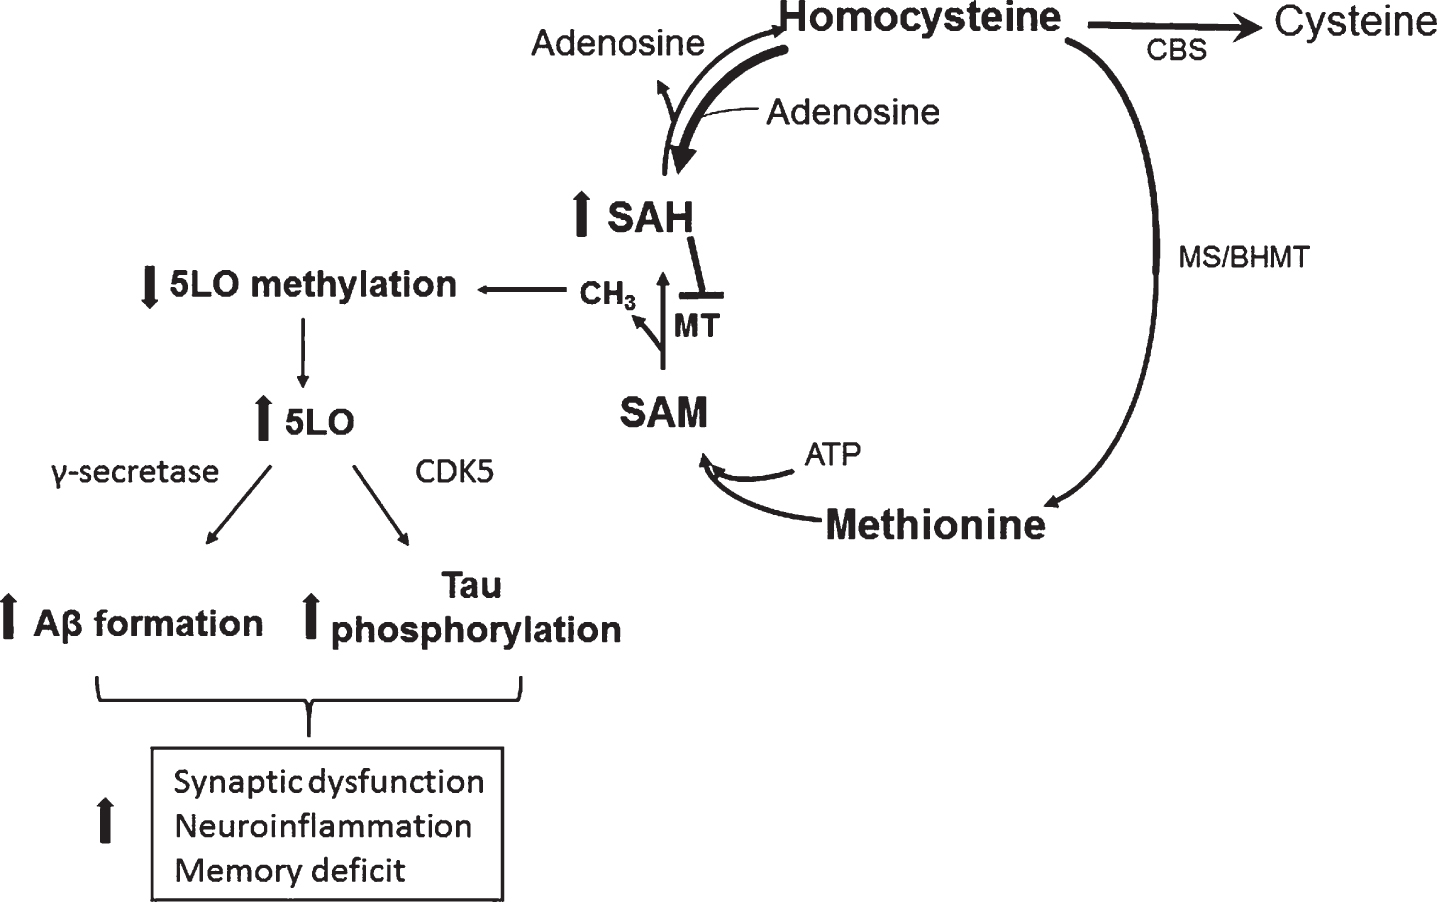 Effect of HHCY on AD pathogenesis through 5LO. In a condition of HHCY the resulting increase in SAH levels reduce 5LO promoter methylation, which then translates in its own activation and higher 5LO gene expression. Higher 5LO levels promote amyloid-β formation and tau phosphorylation through the γ-secretase and CDK5 pathways, respectively. These events ultimately result in synaptic dysfunction and pathology, neuroinflammation and memory deficit.